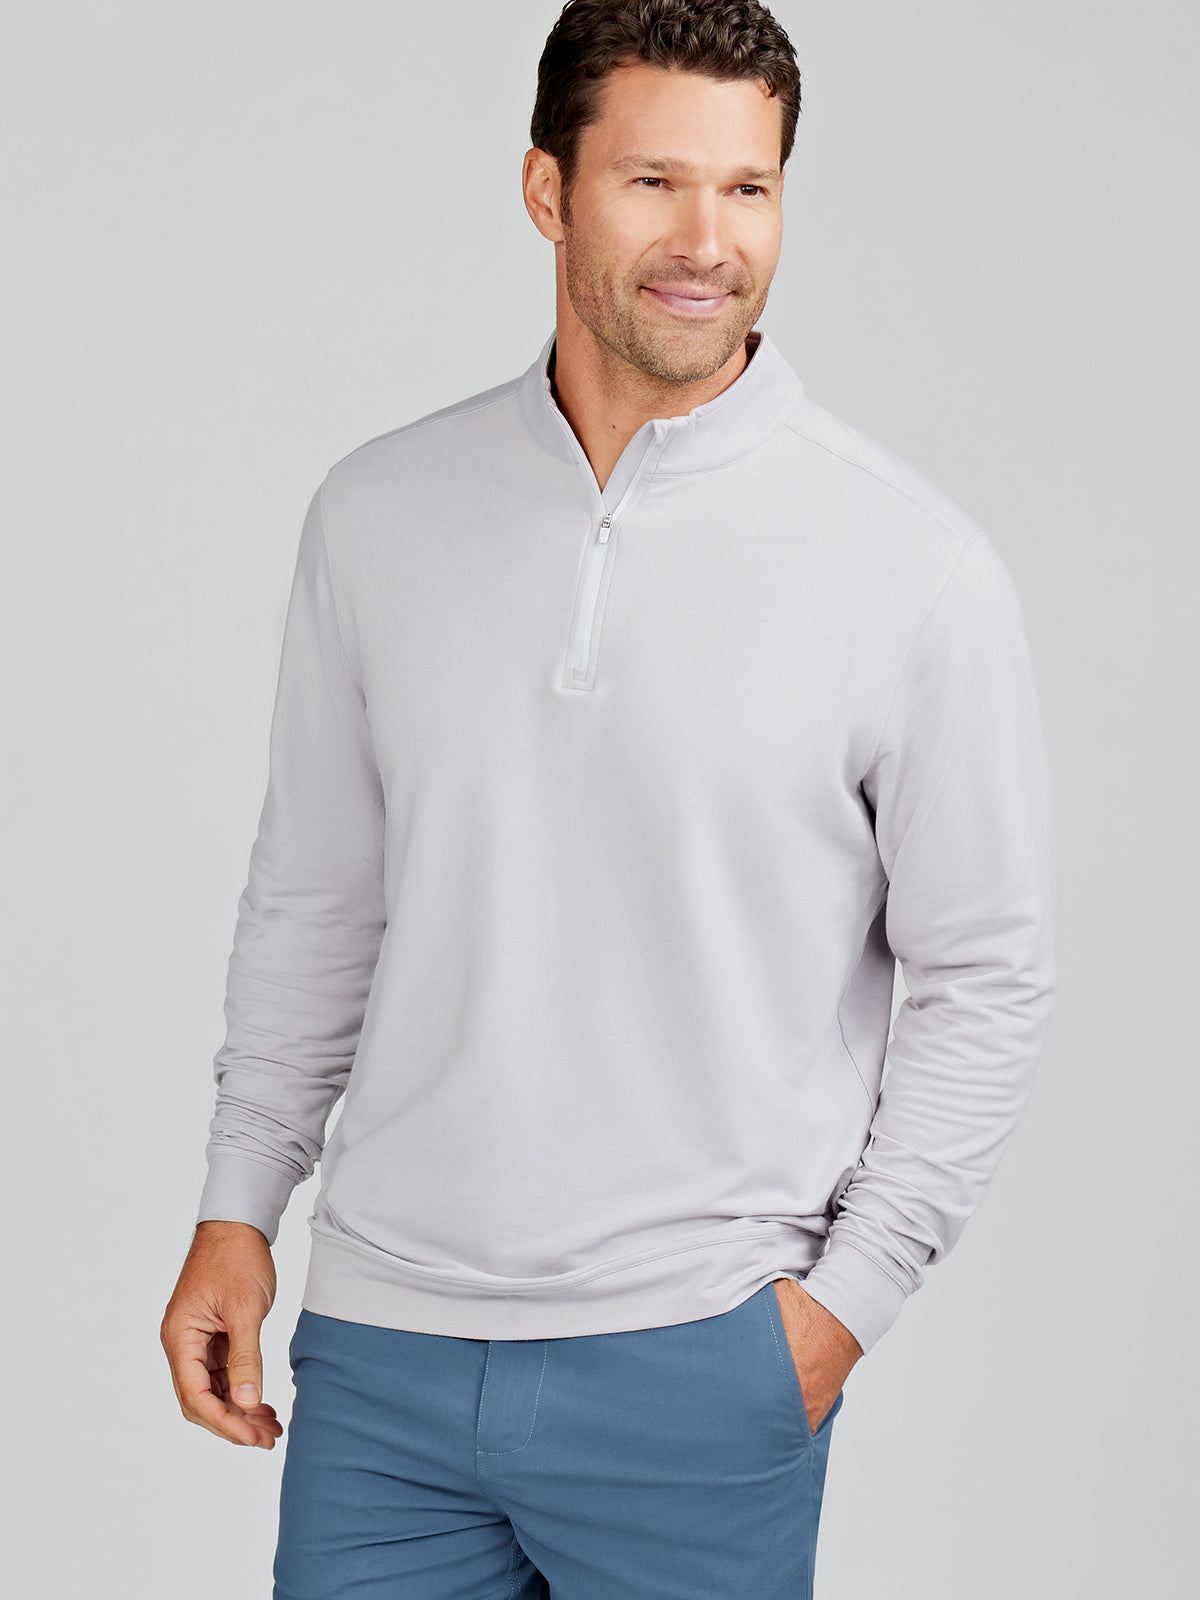 Navy Quarter Zip with FREE delivery - From the linksland of